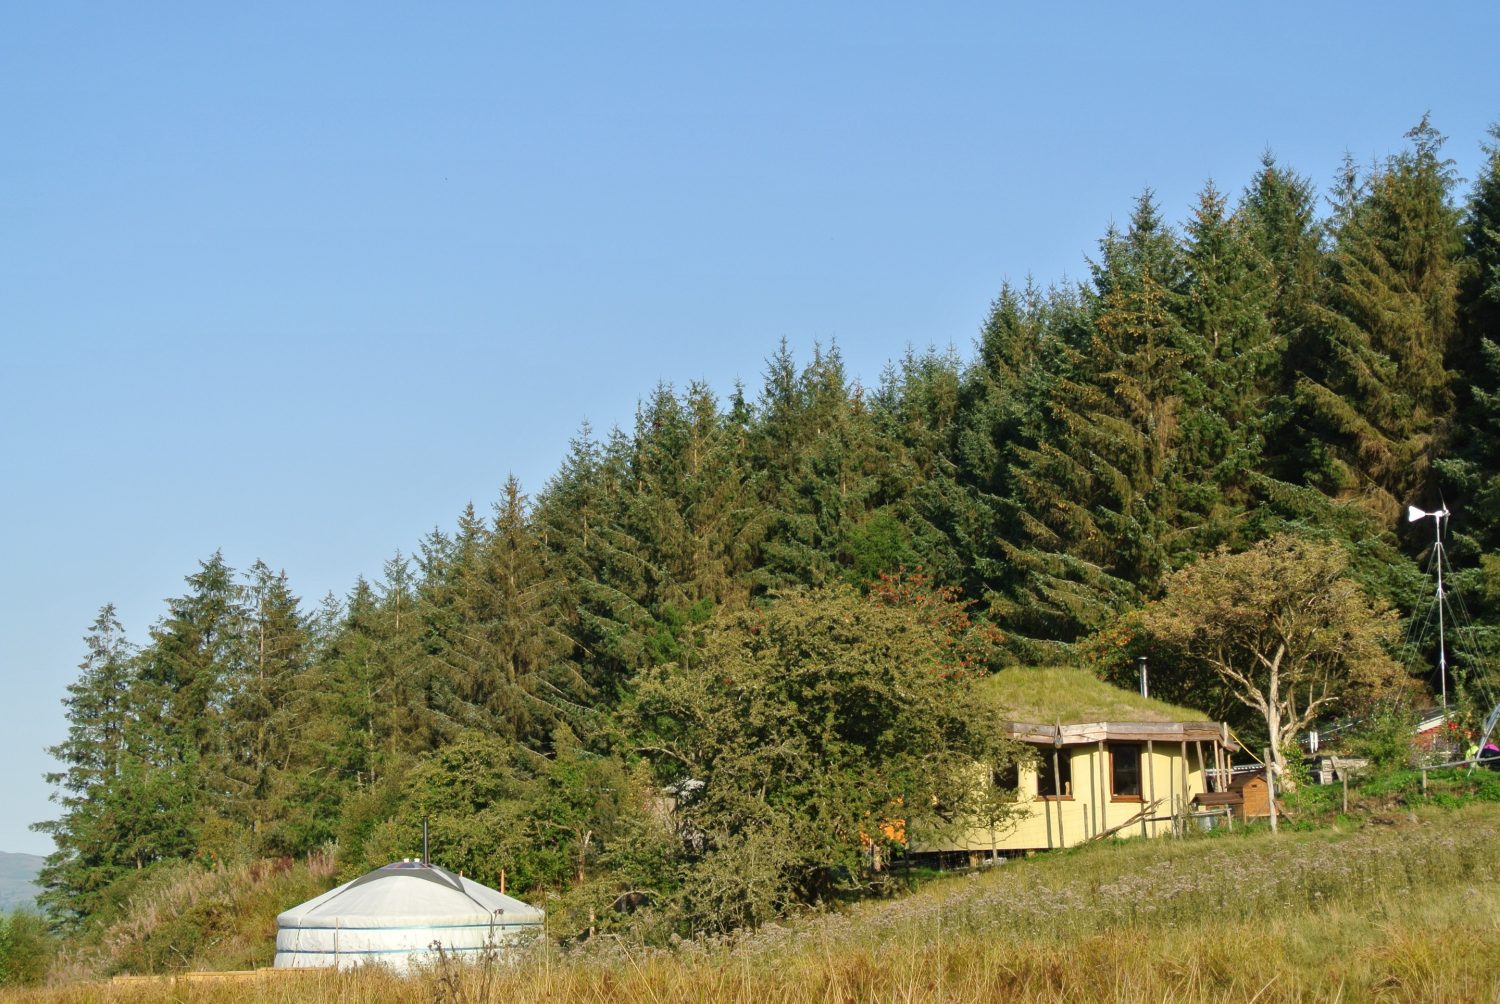 Ty Mam Mawr eco retreat centre straw bale round house and mongolian yurt in North Wales